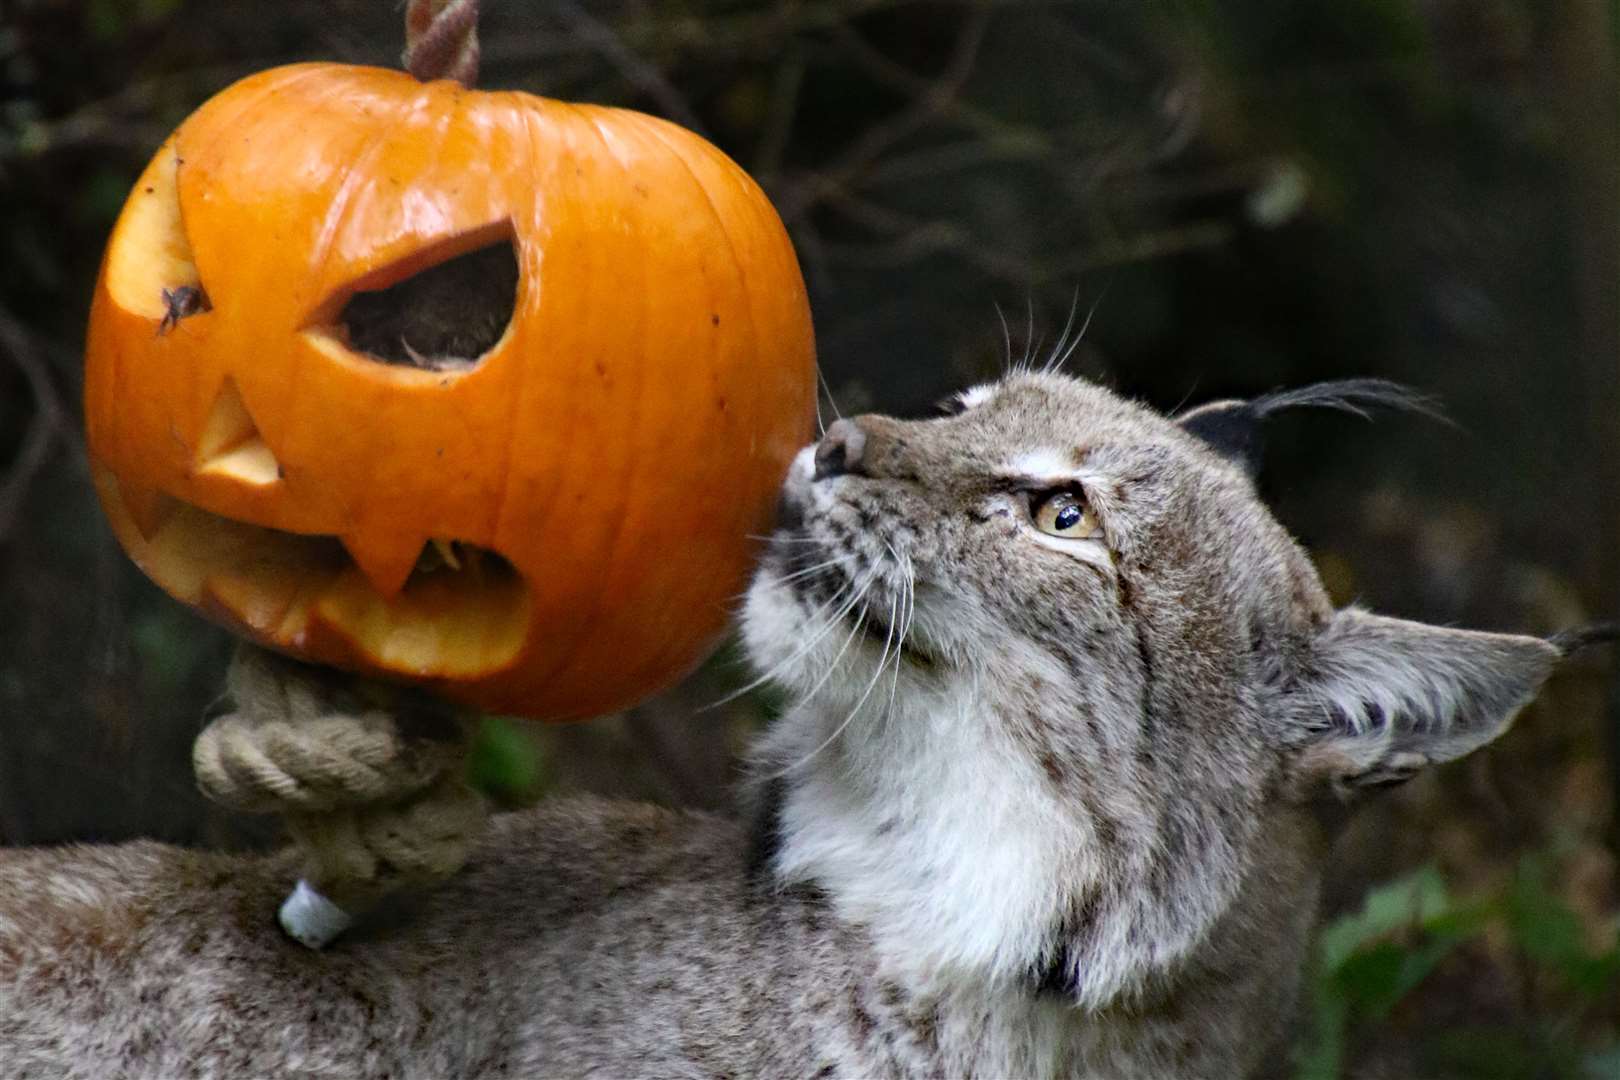 The lynx at Wildwood is getting into the Halloween spirit. Picture: Wildwood Trust